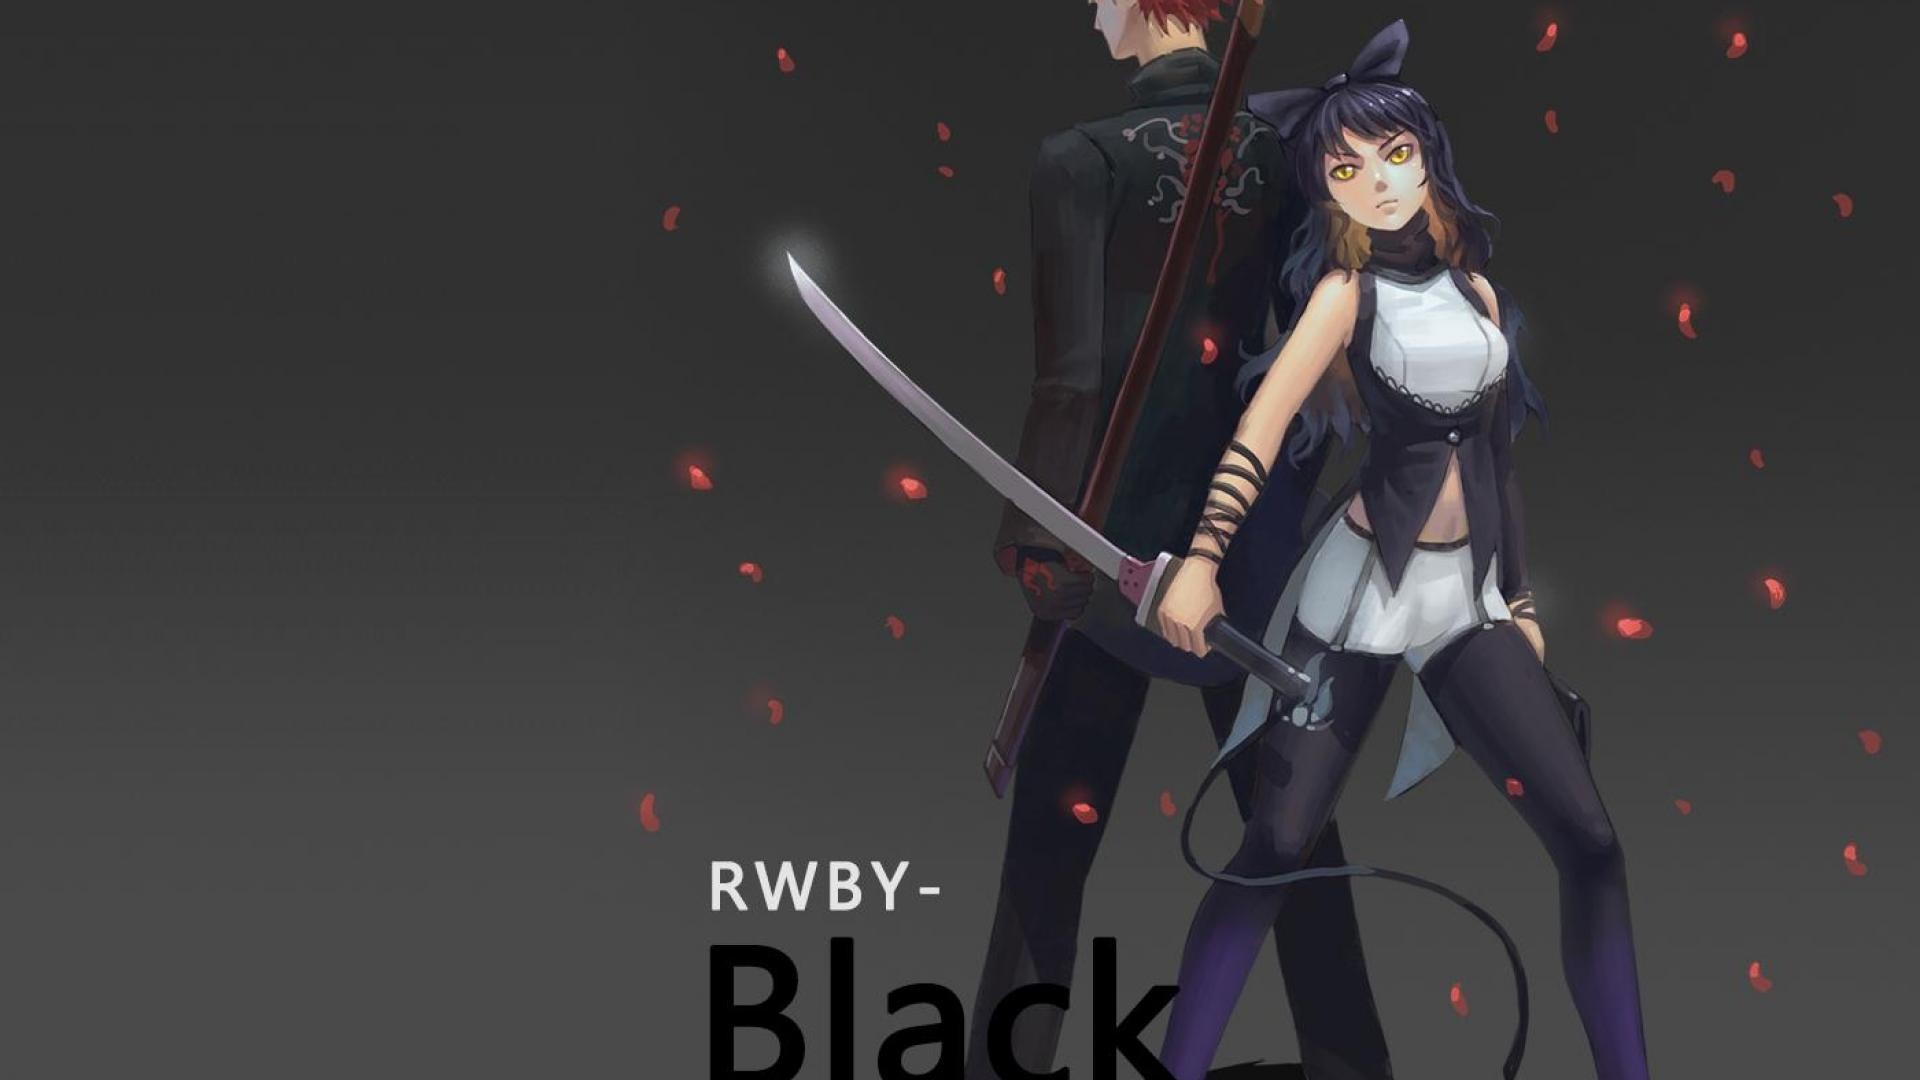 Rwby black – High Quality and Resolution Wallpapers